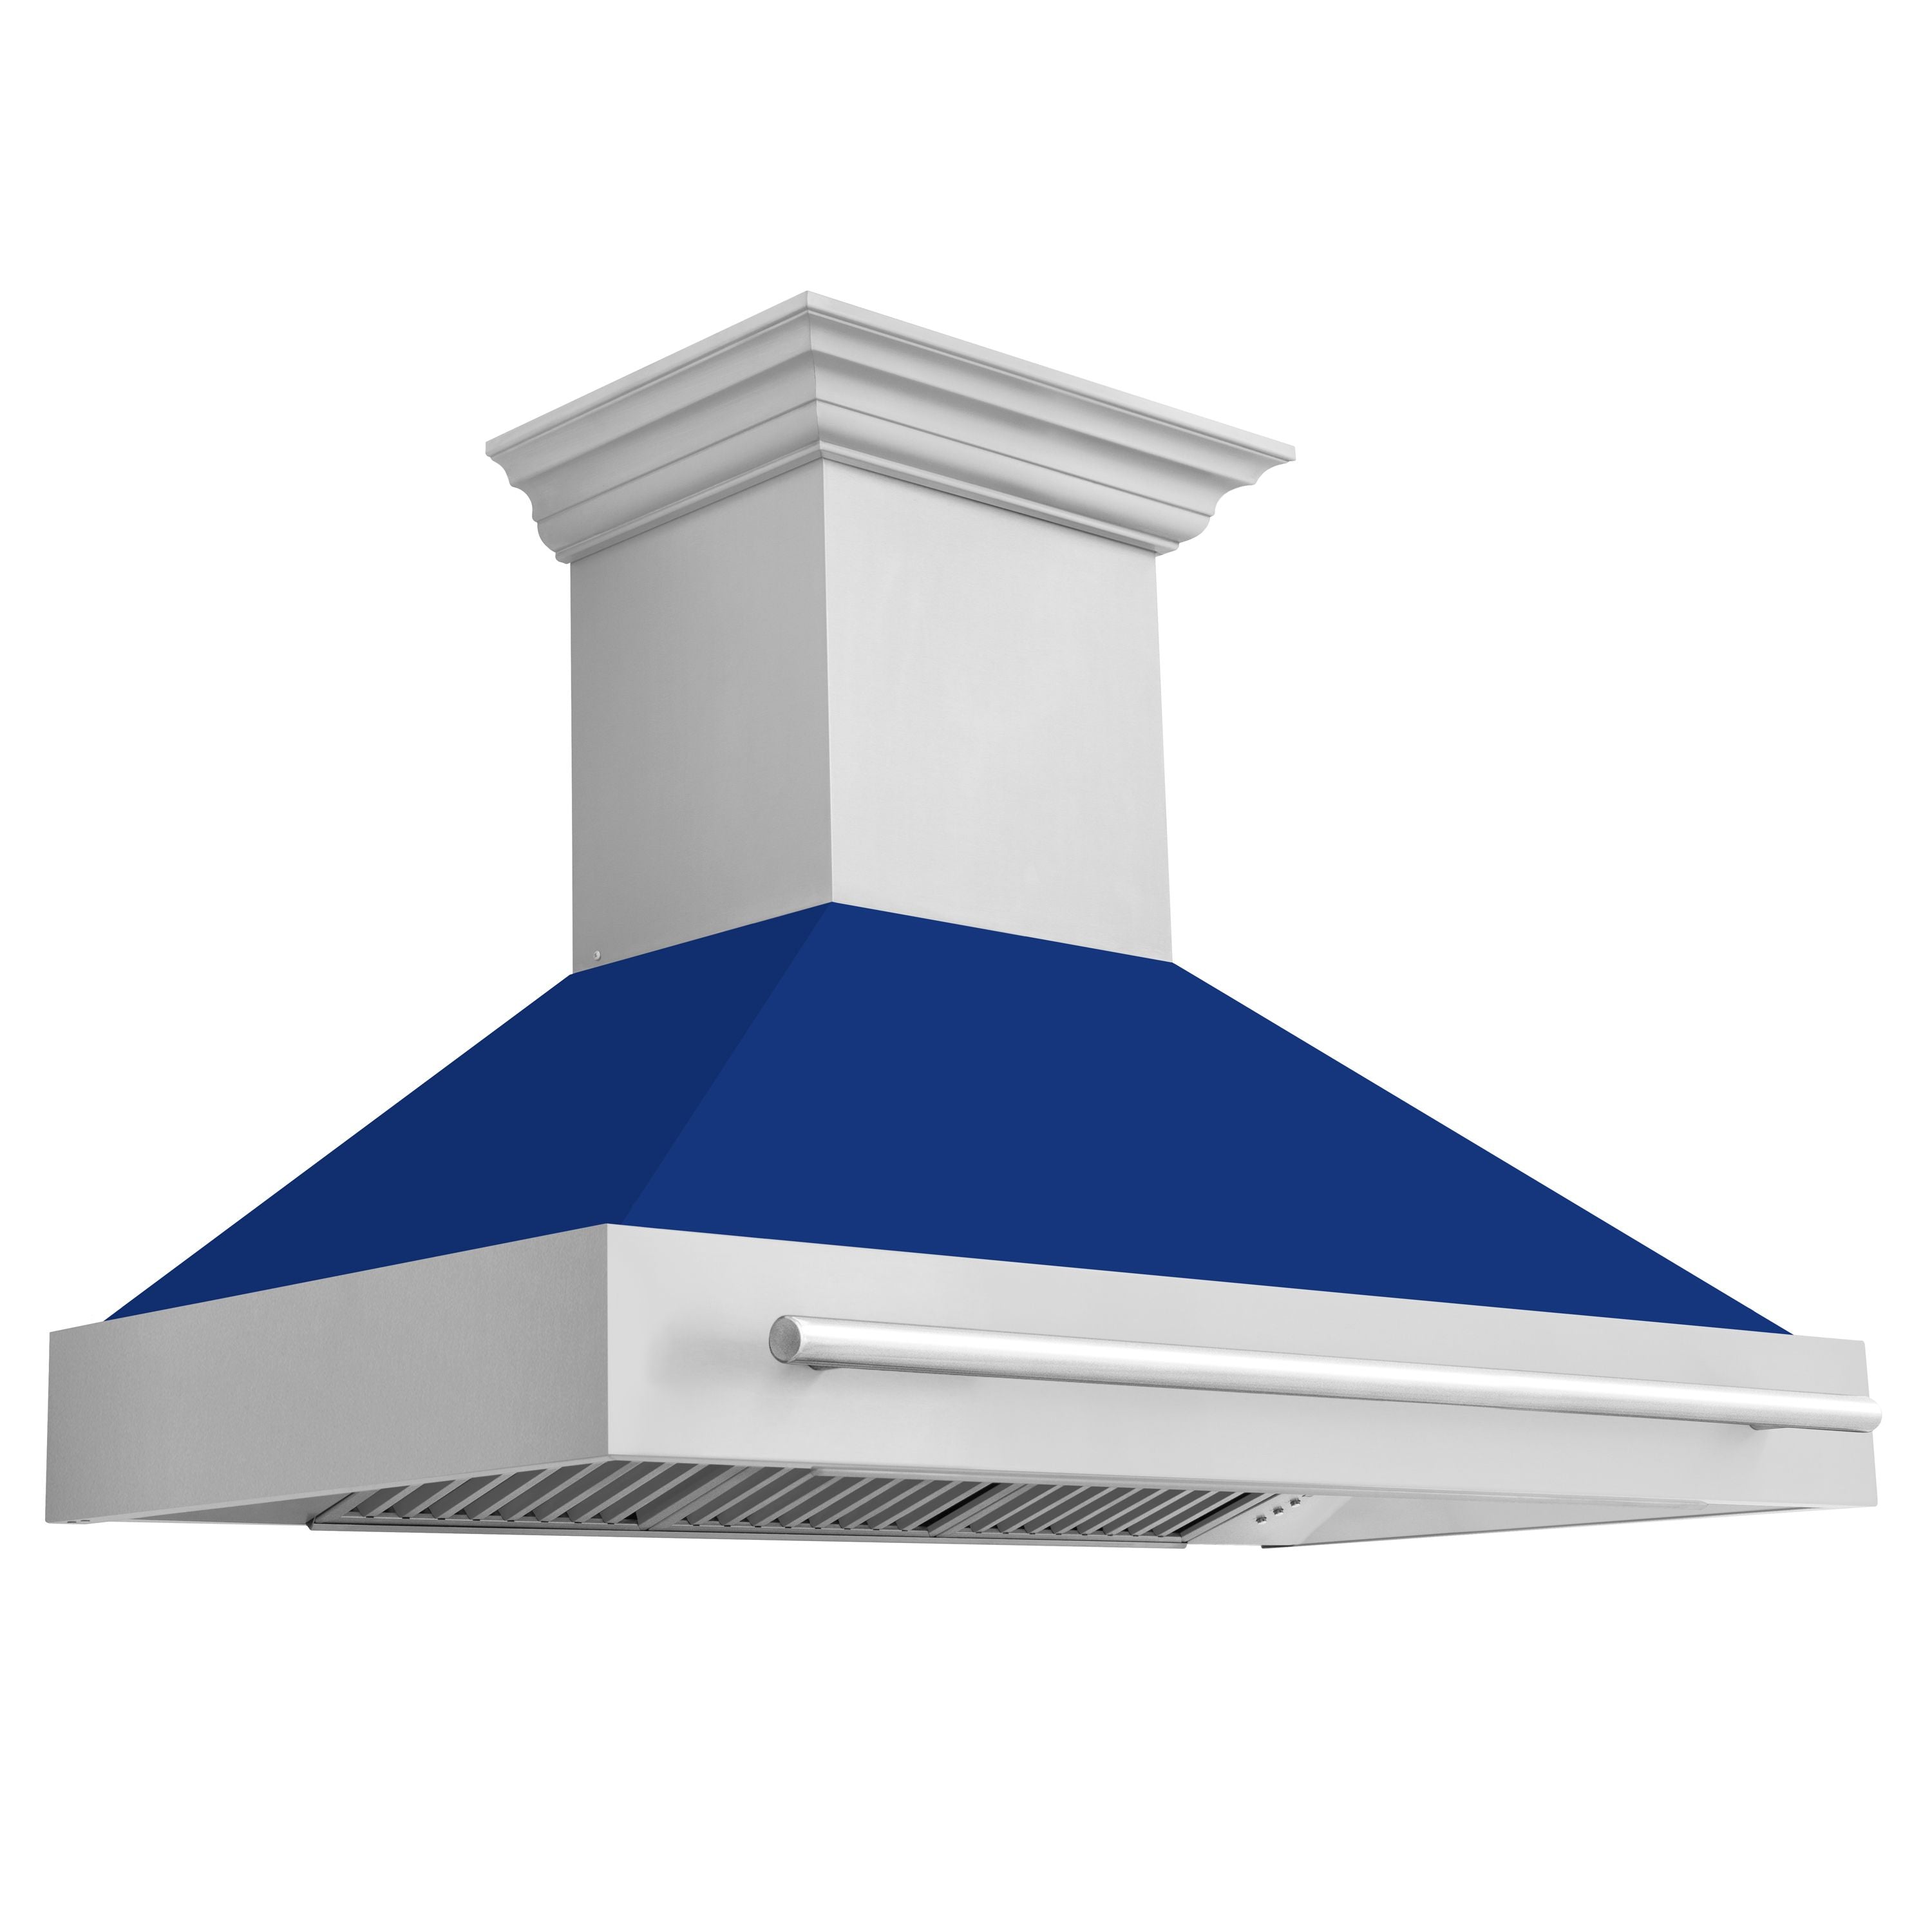 ZLINE 48 In. Stainless Steel Range Hood with Blue Gloss Shell and Stainless Steel Handle, 8654STX-BG-48